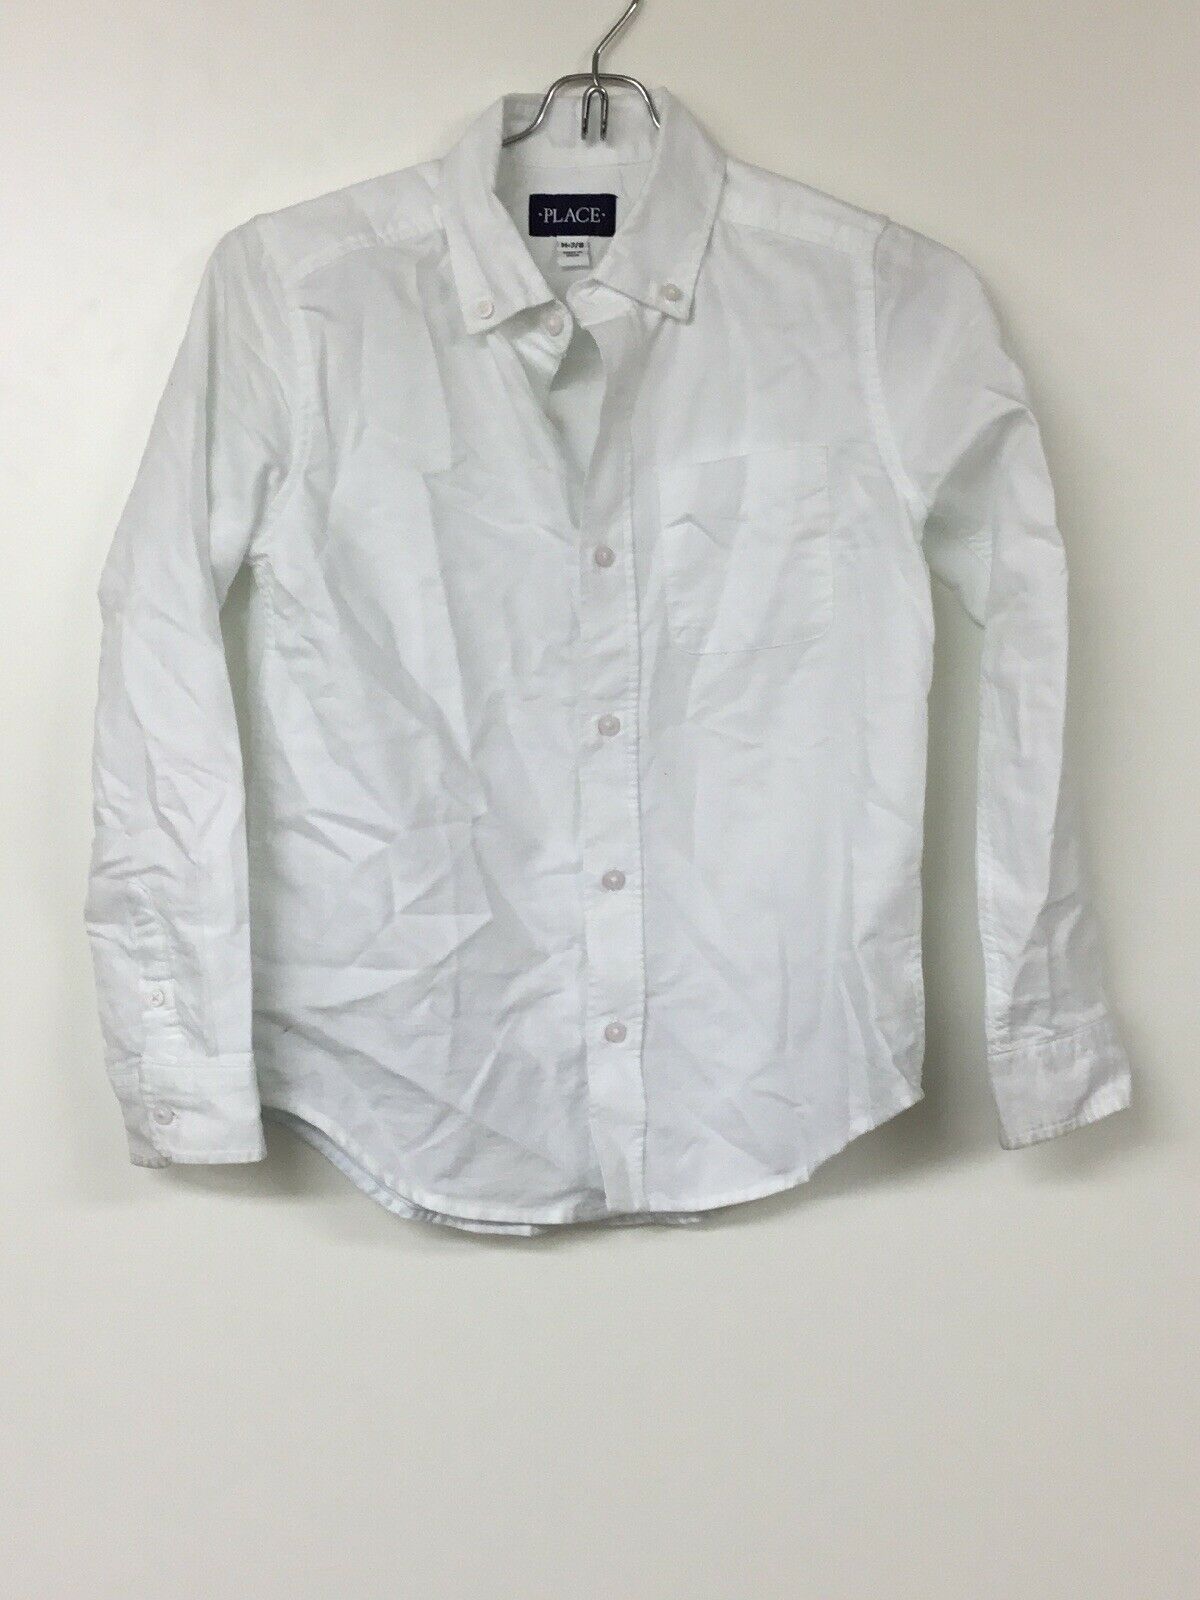 The Childrens Place Boy’s White Button Up, Long Sleeve, Collared Shirt ...